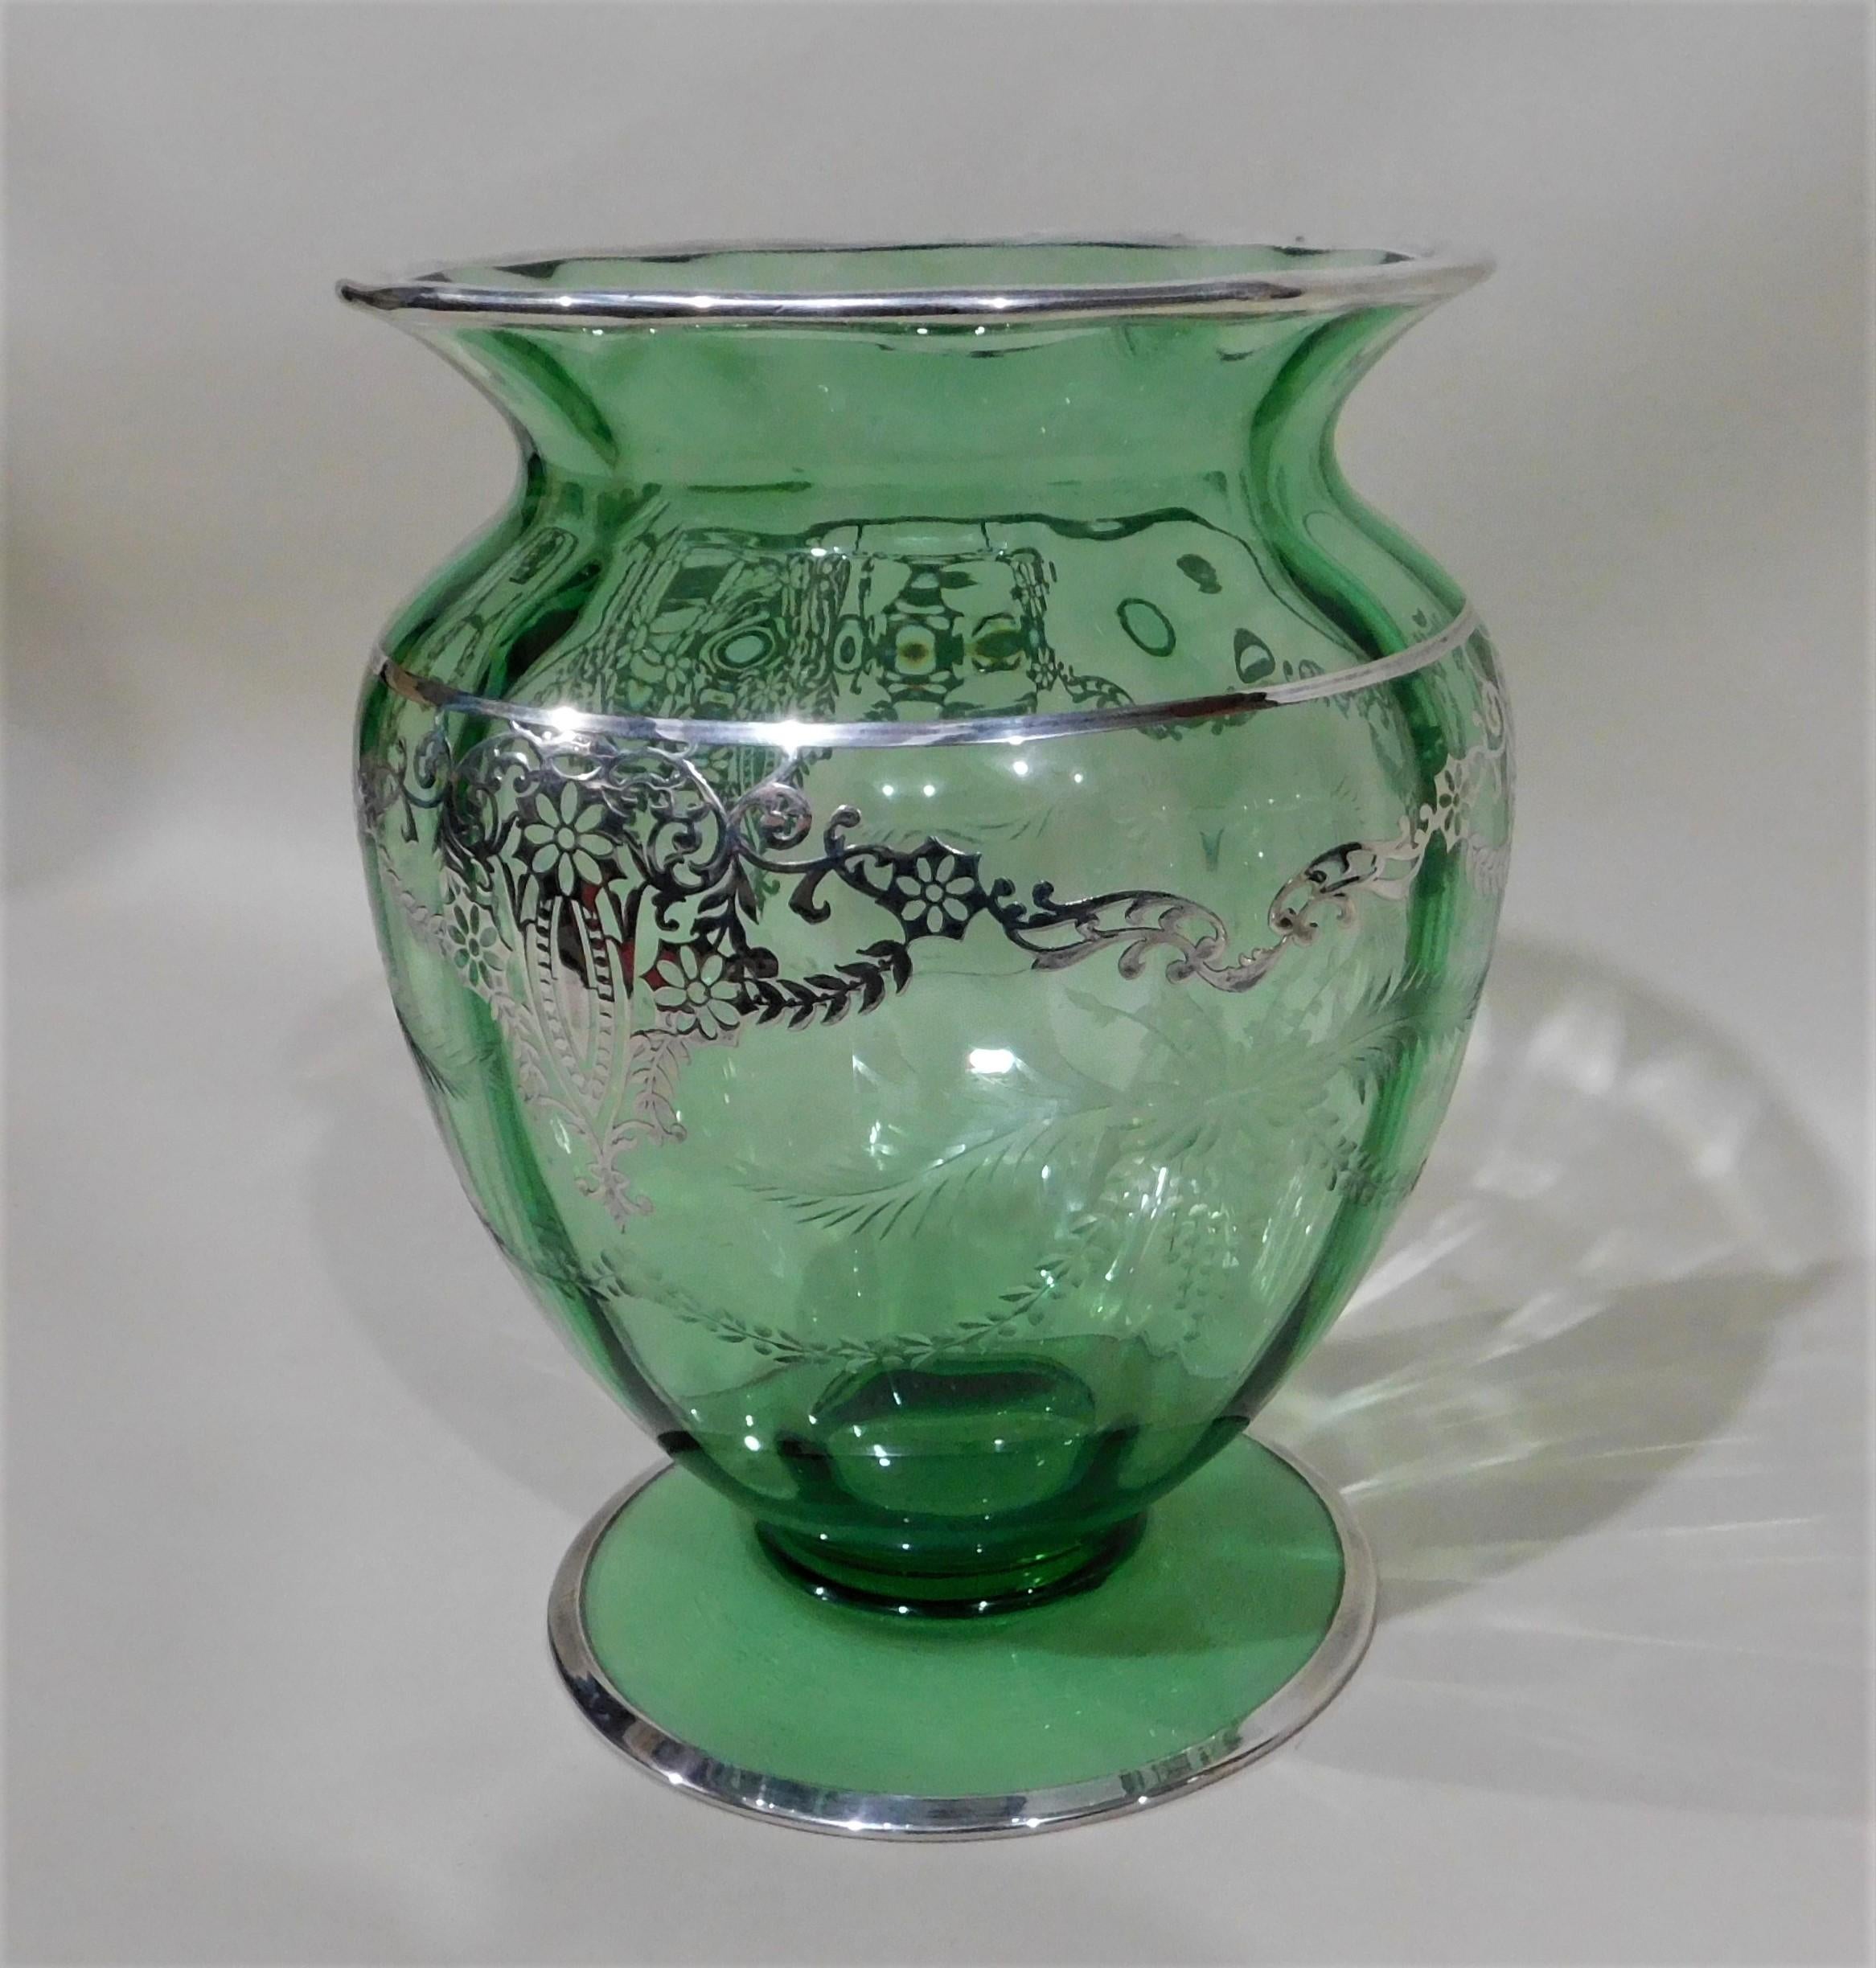 20th Century American Wheeled Cut Green Glass Vase with Silver Overlay, circa 1920s For Sale